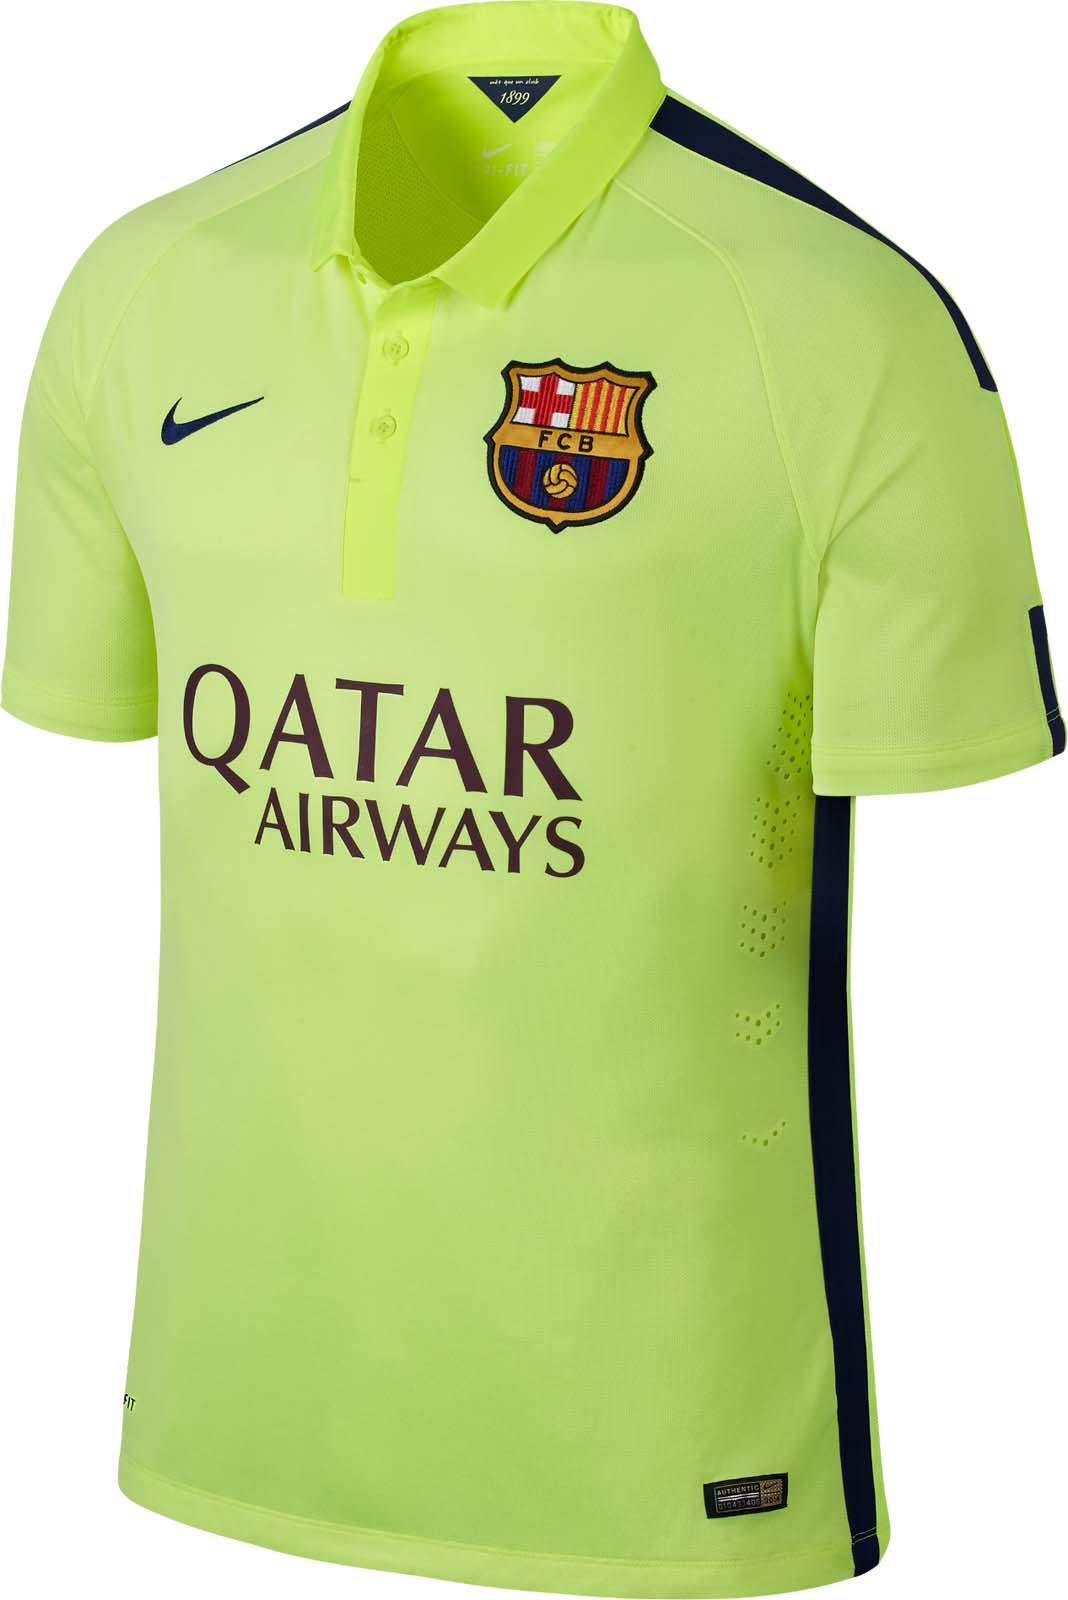   fc barcelona 2014 15 third kit this is the new barcelona 14 15 third  fc barcelona kit 2014/15